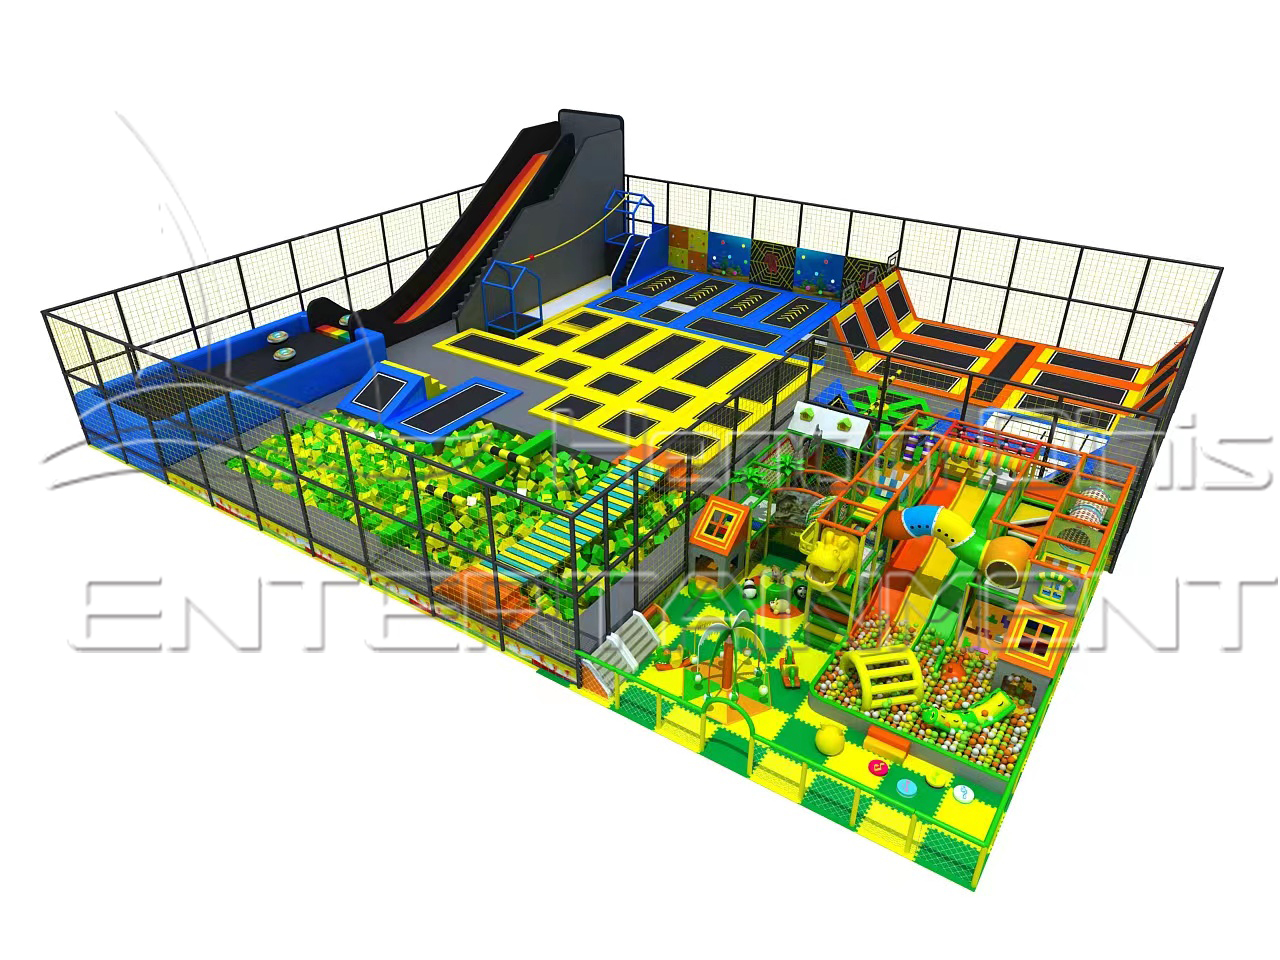 How to select a site for the construction of a trampoline park